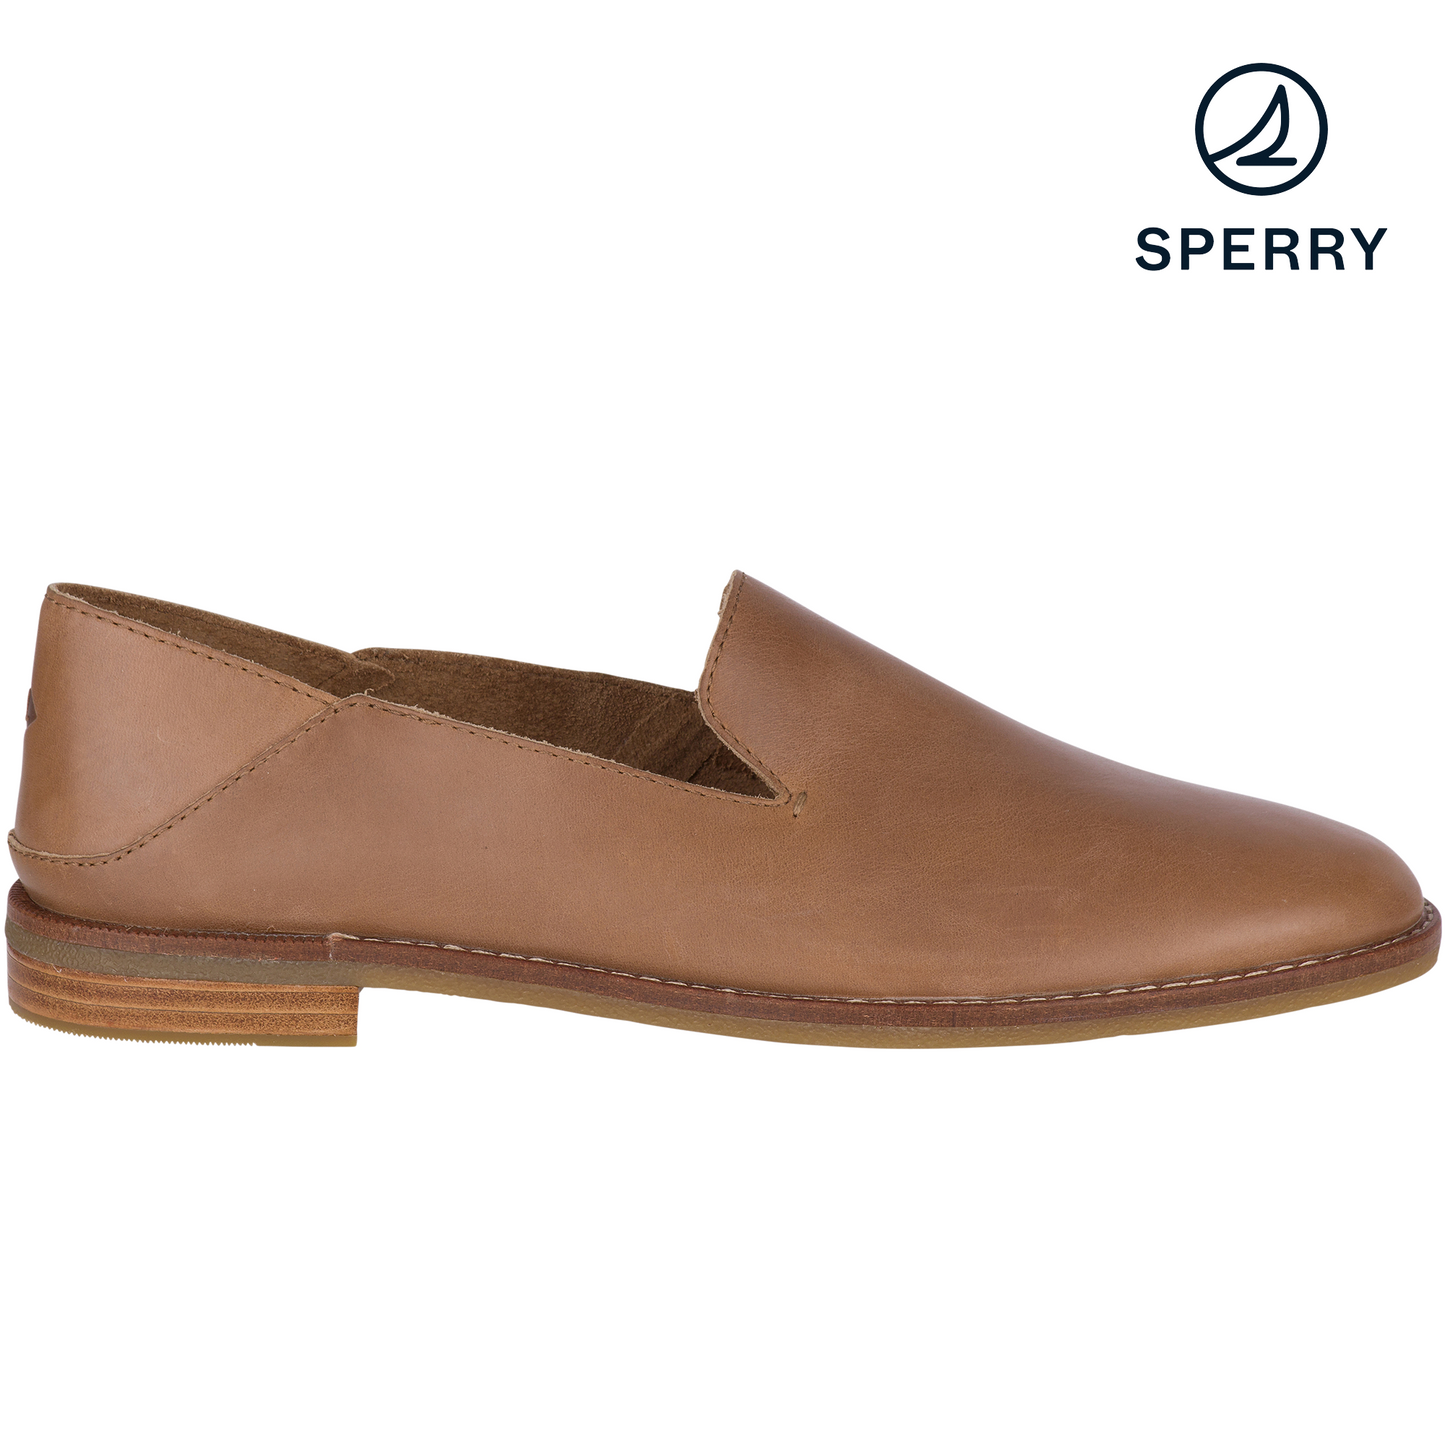 Sperry Women's Seaport Levy Tan Casual (STS82456)